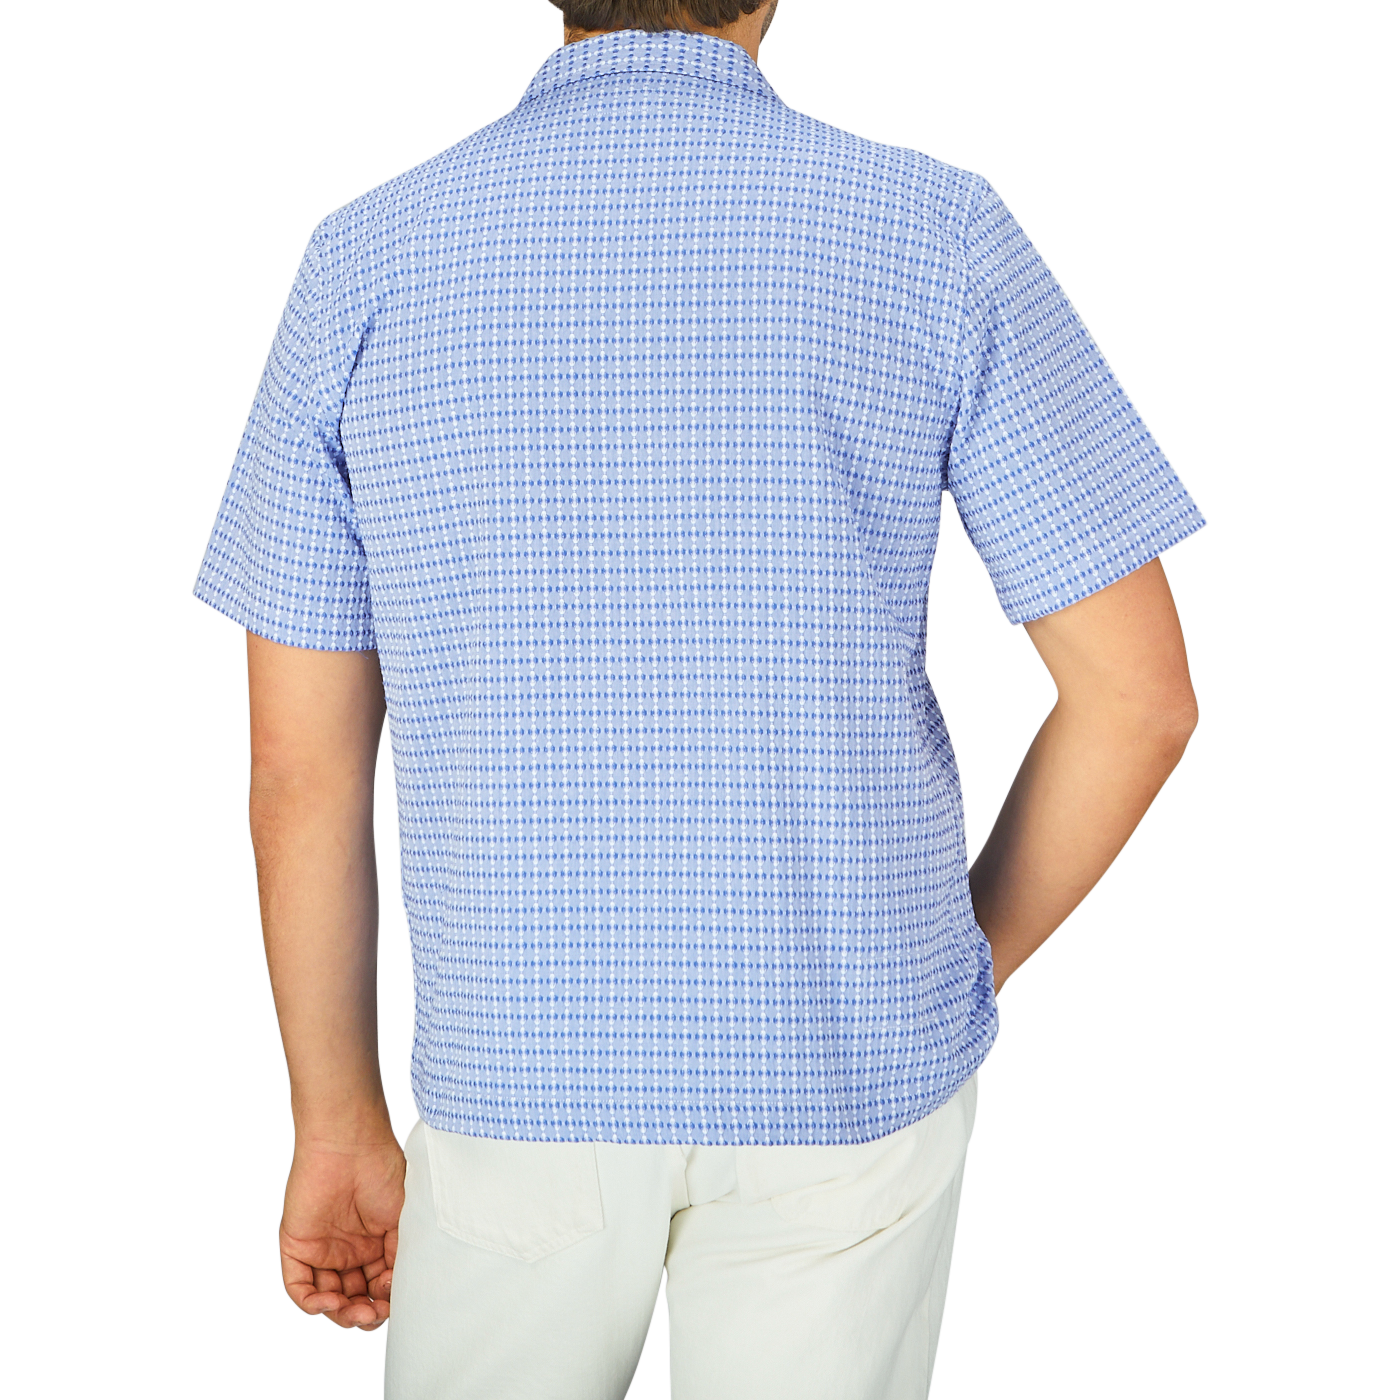 The back view of a man wearing a Light Blue Cotton Camp Collar Road Shirt by Universal Works.